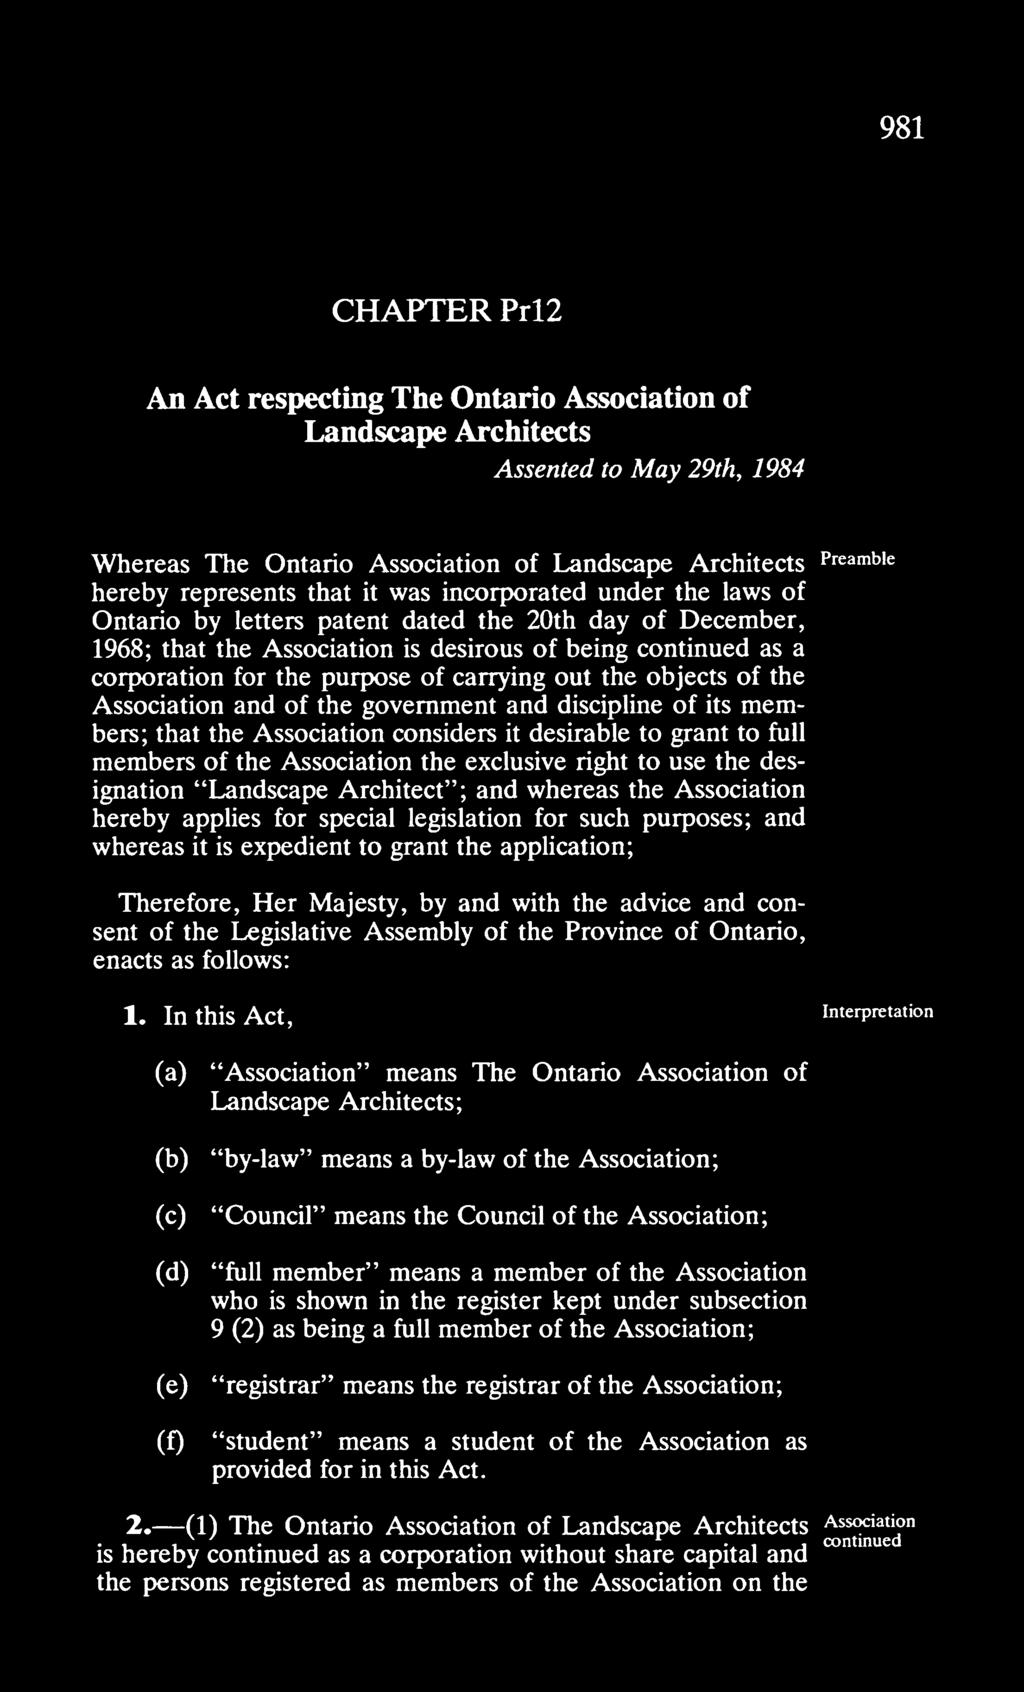 out the objects of the Association and of the government and discipline of its members; that the Association considers it desirable to grant to full members of the Association the exclusive right to